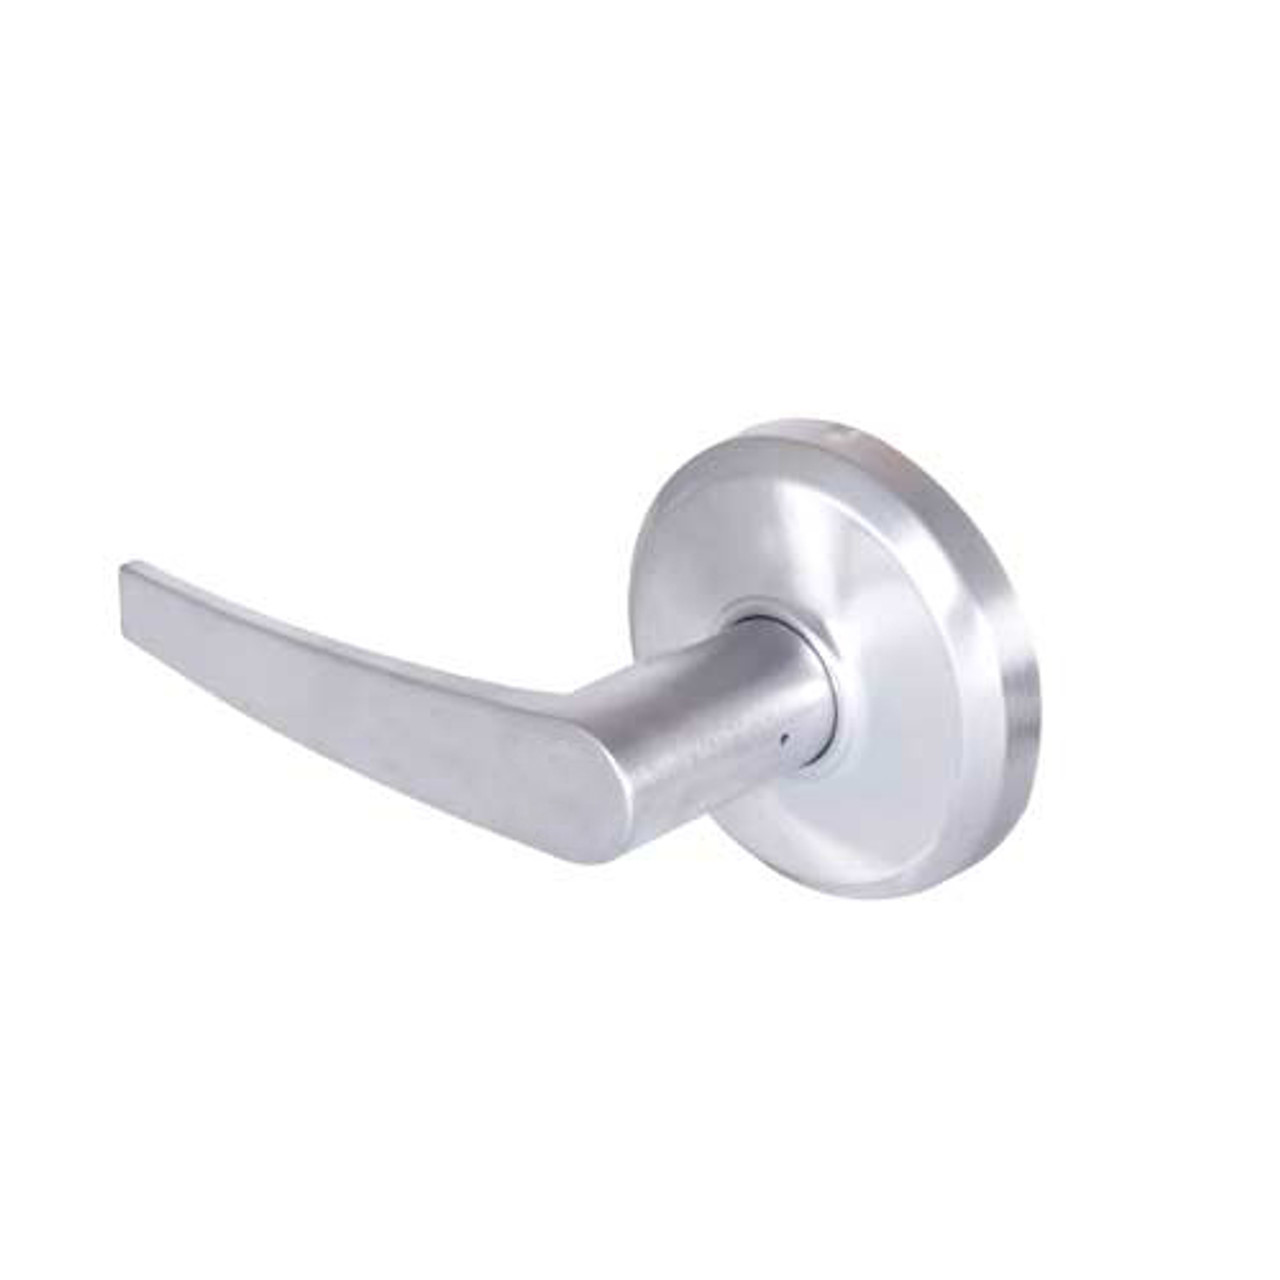 QCL235A625NS8FLR Stanley QCL200 Series Cylindrical Communicating Lock with Slate Lever in Bright Chrome Finish